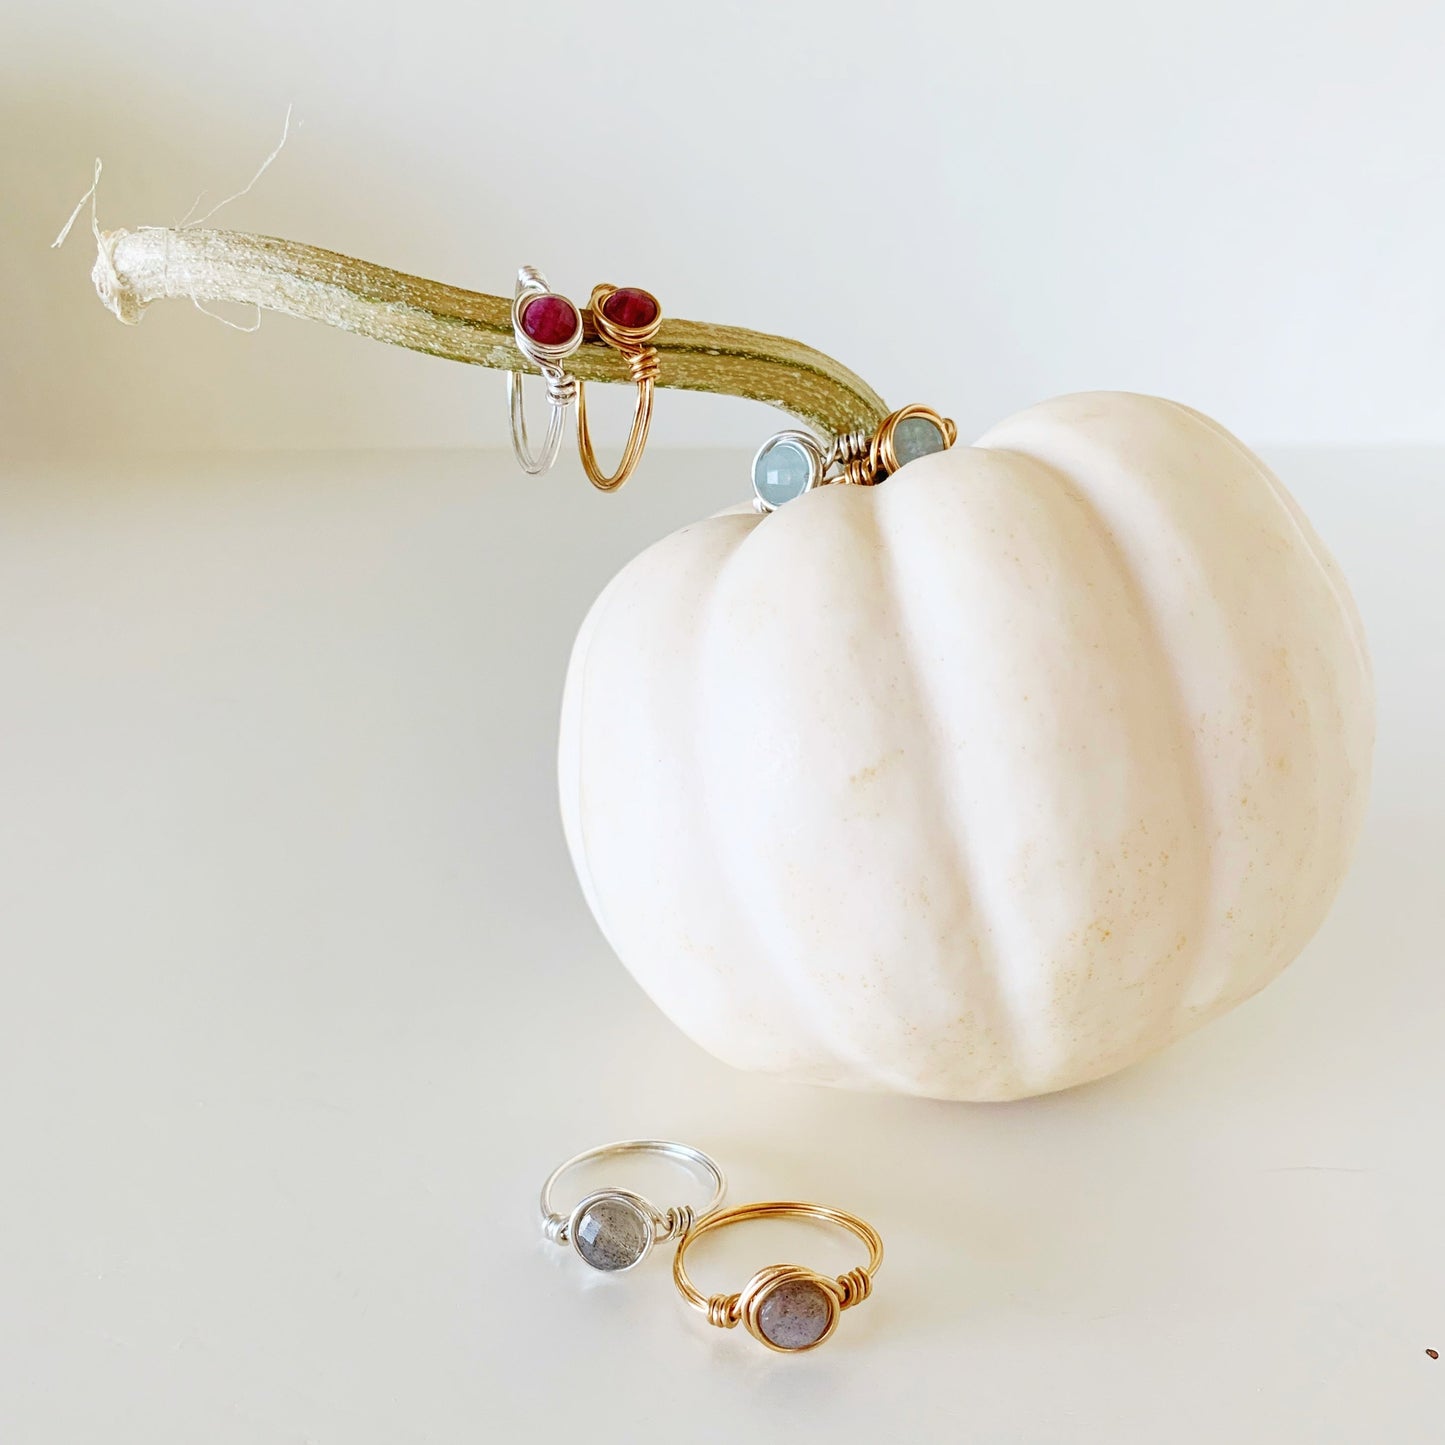 a variety of different mermaids and madeleines wire-wrapped rings are placed on and near a white pumpkin and photographed on a white surface